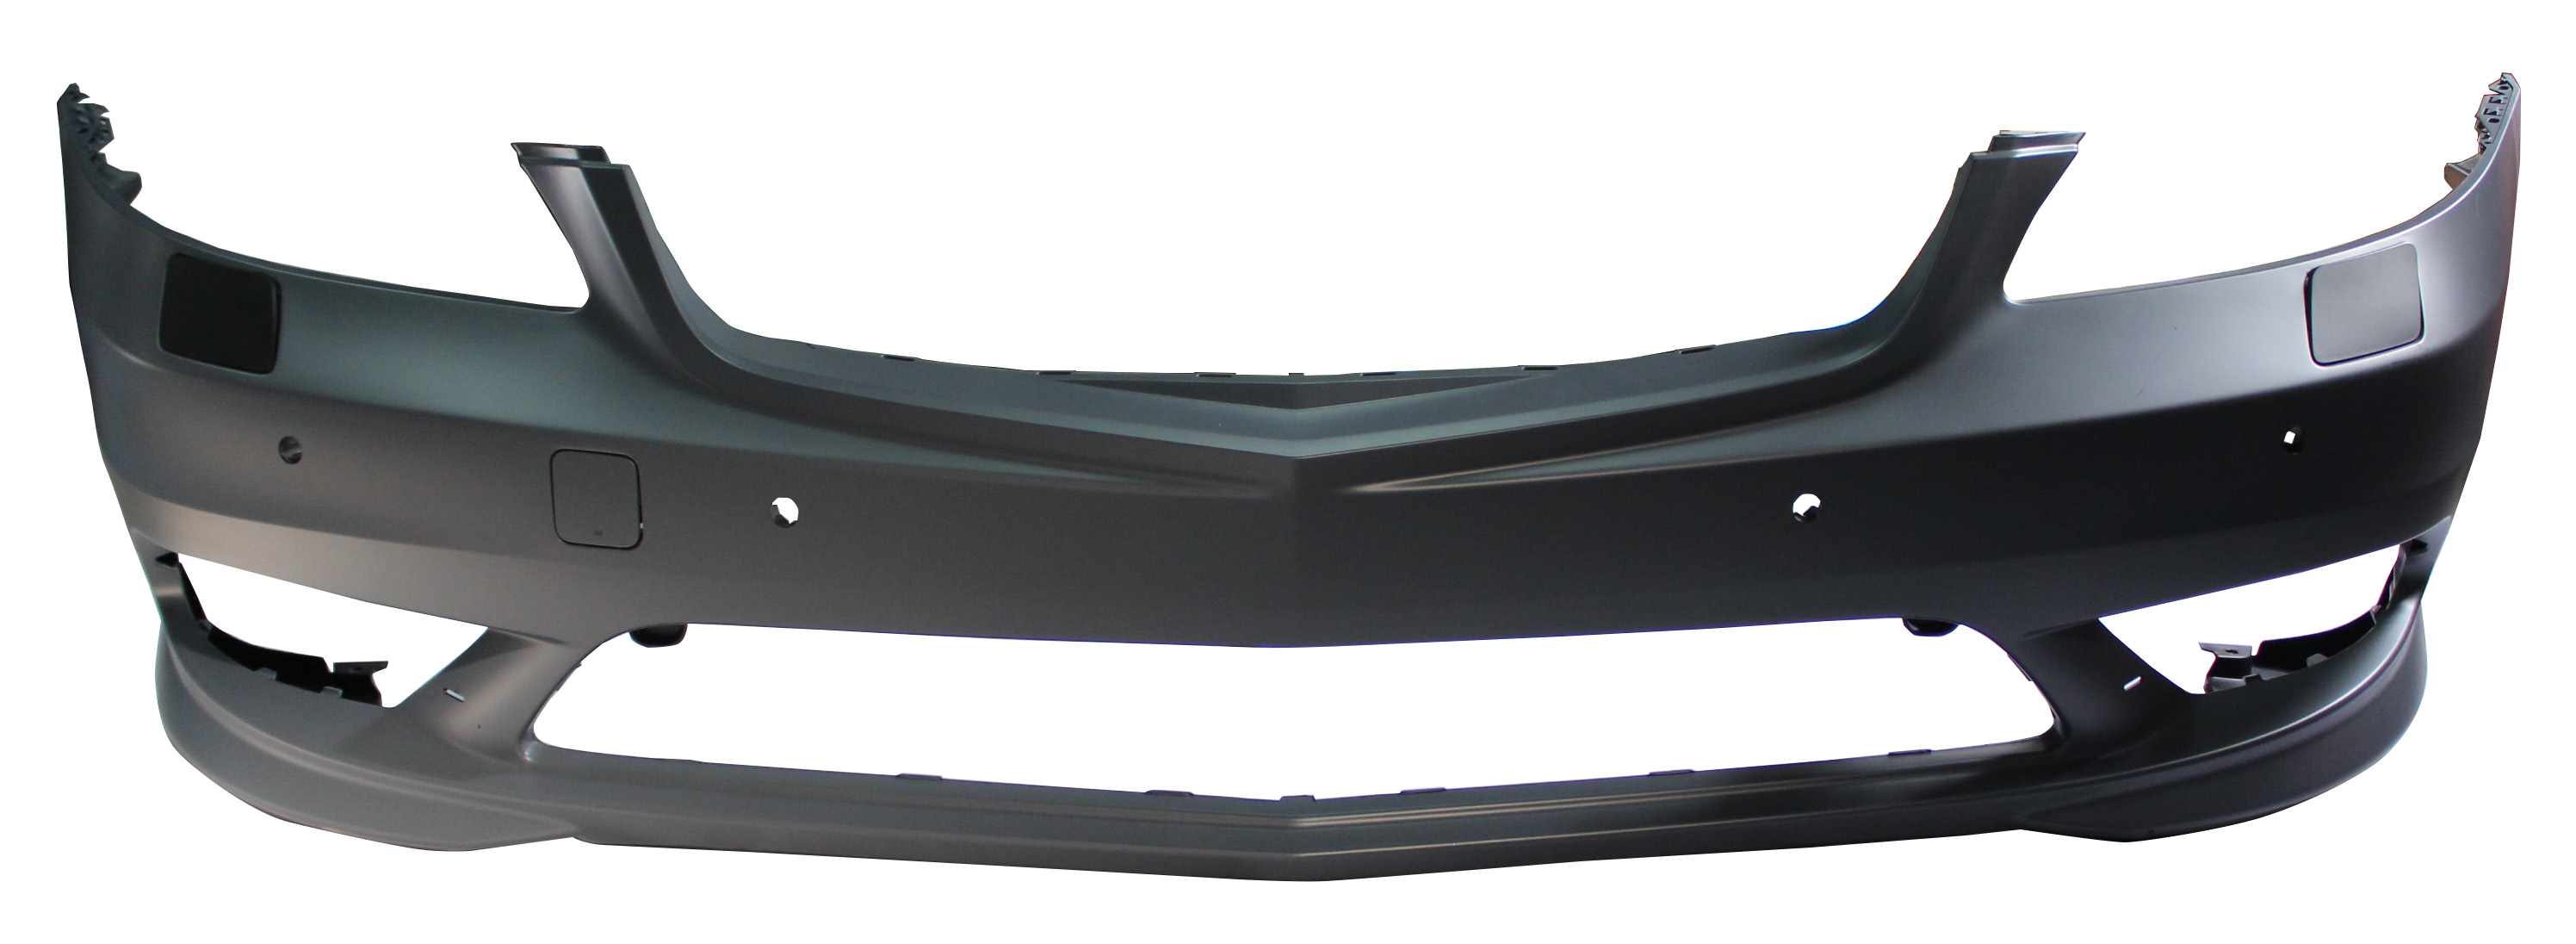 Aftermarket BUMPER COVERS for MERCEDES-BENZ - S350, S350,12-13,Front bumper cover